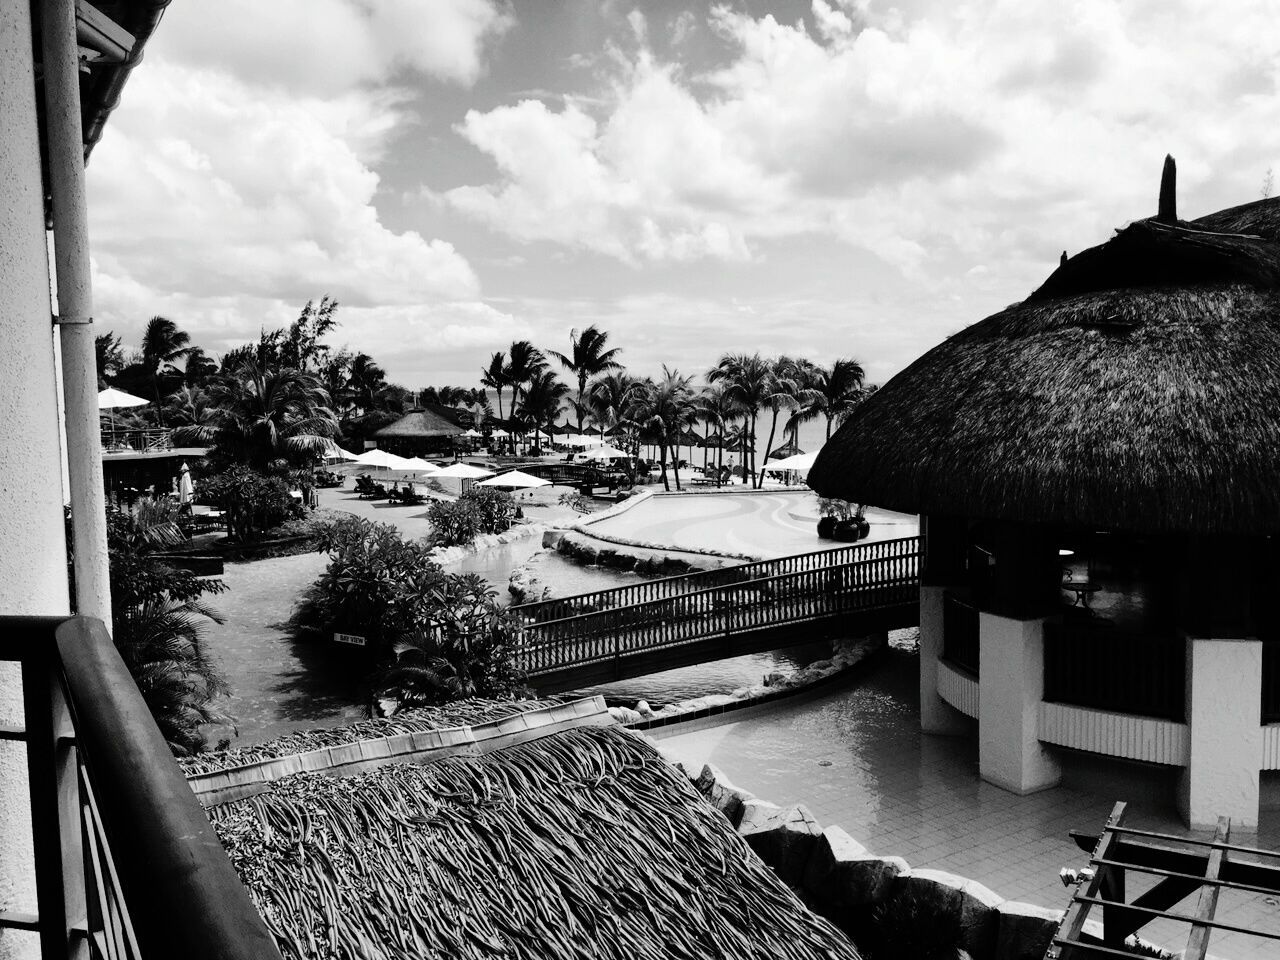 High angle view of gazebo and palm trees at resort against cloudy sky